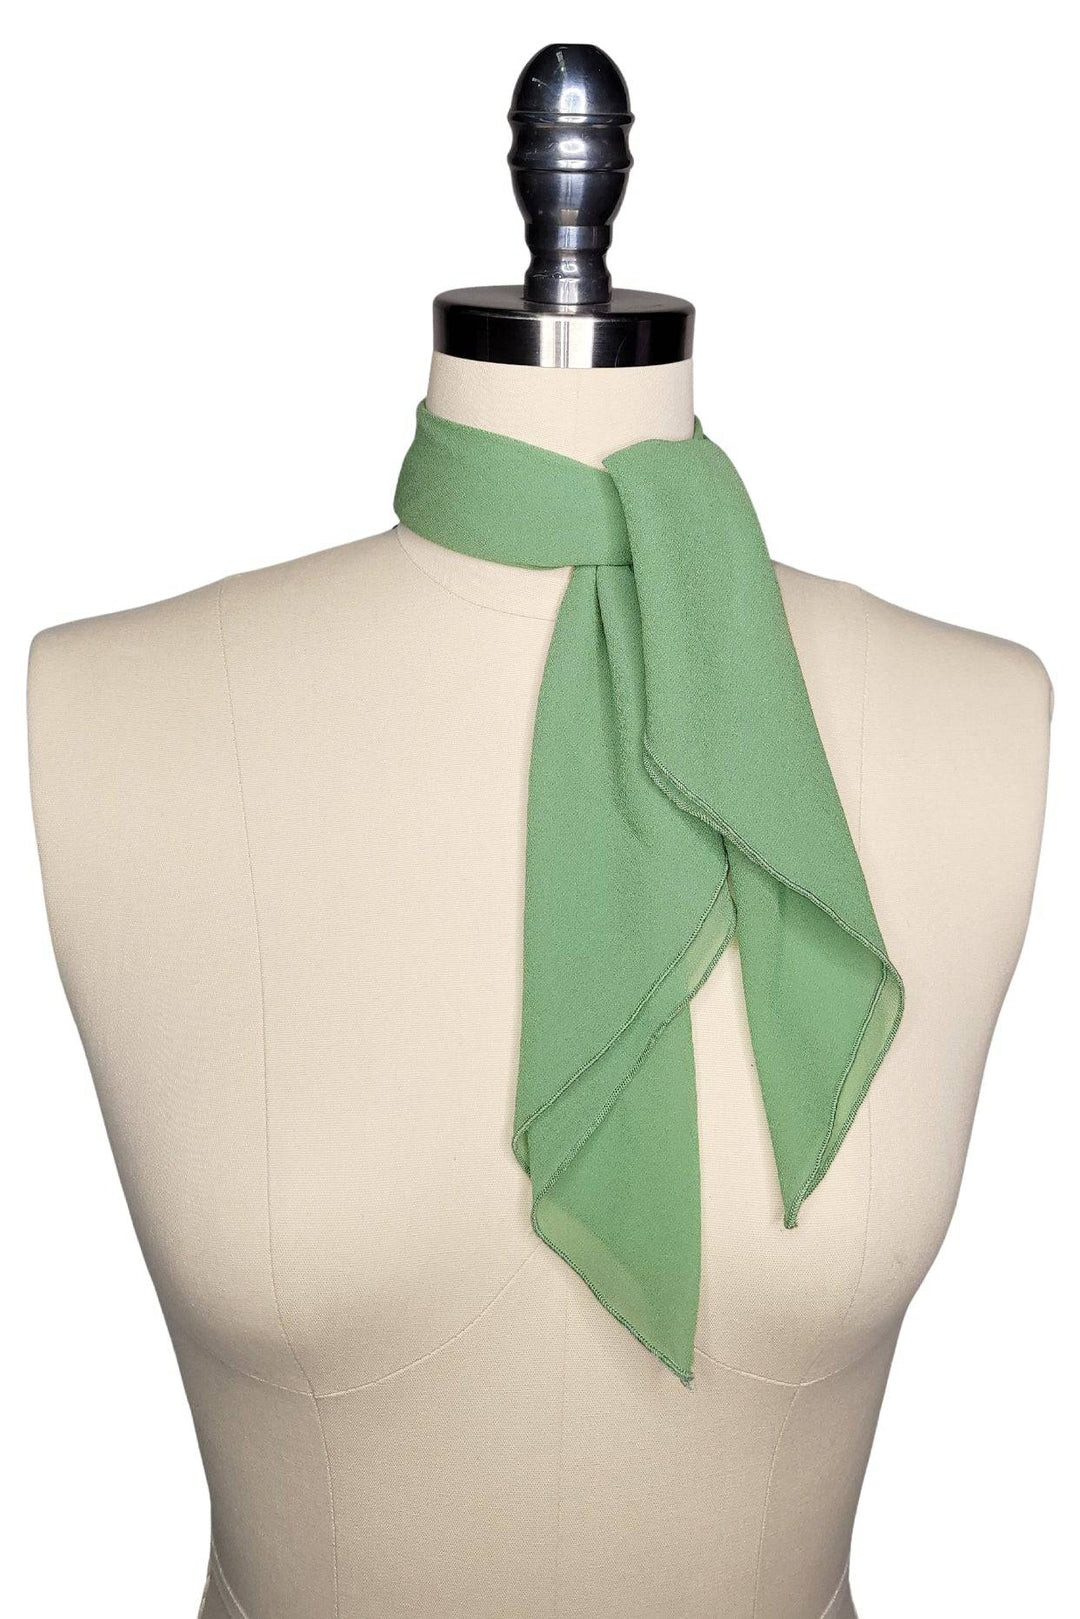 Verona Square Neck Scarf (Green) - Kitten D'Amour